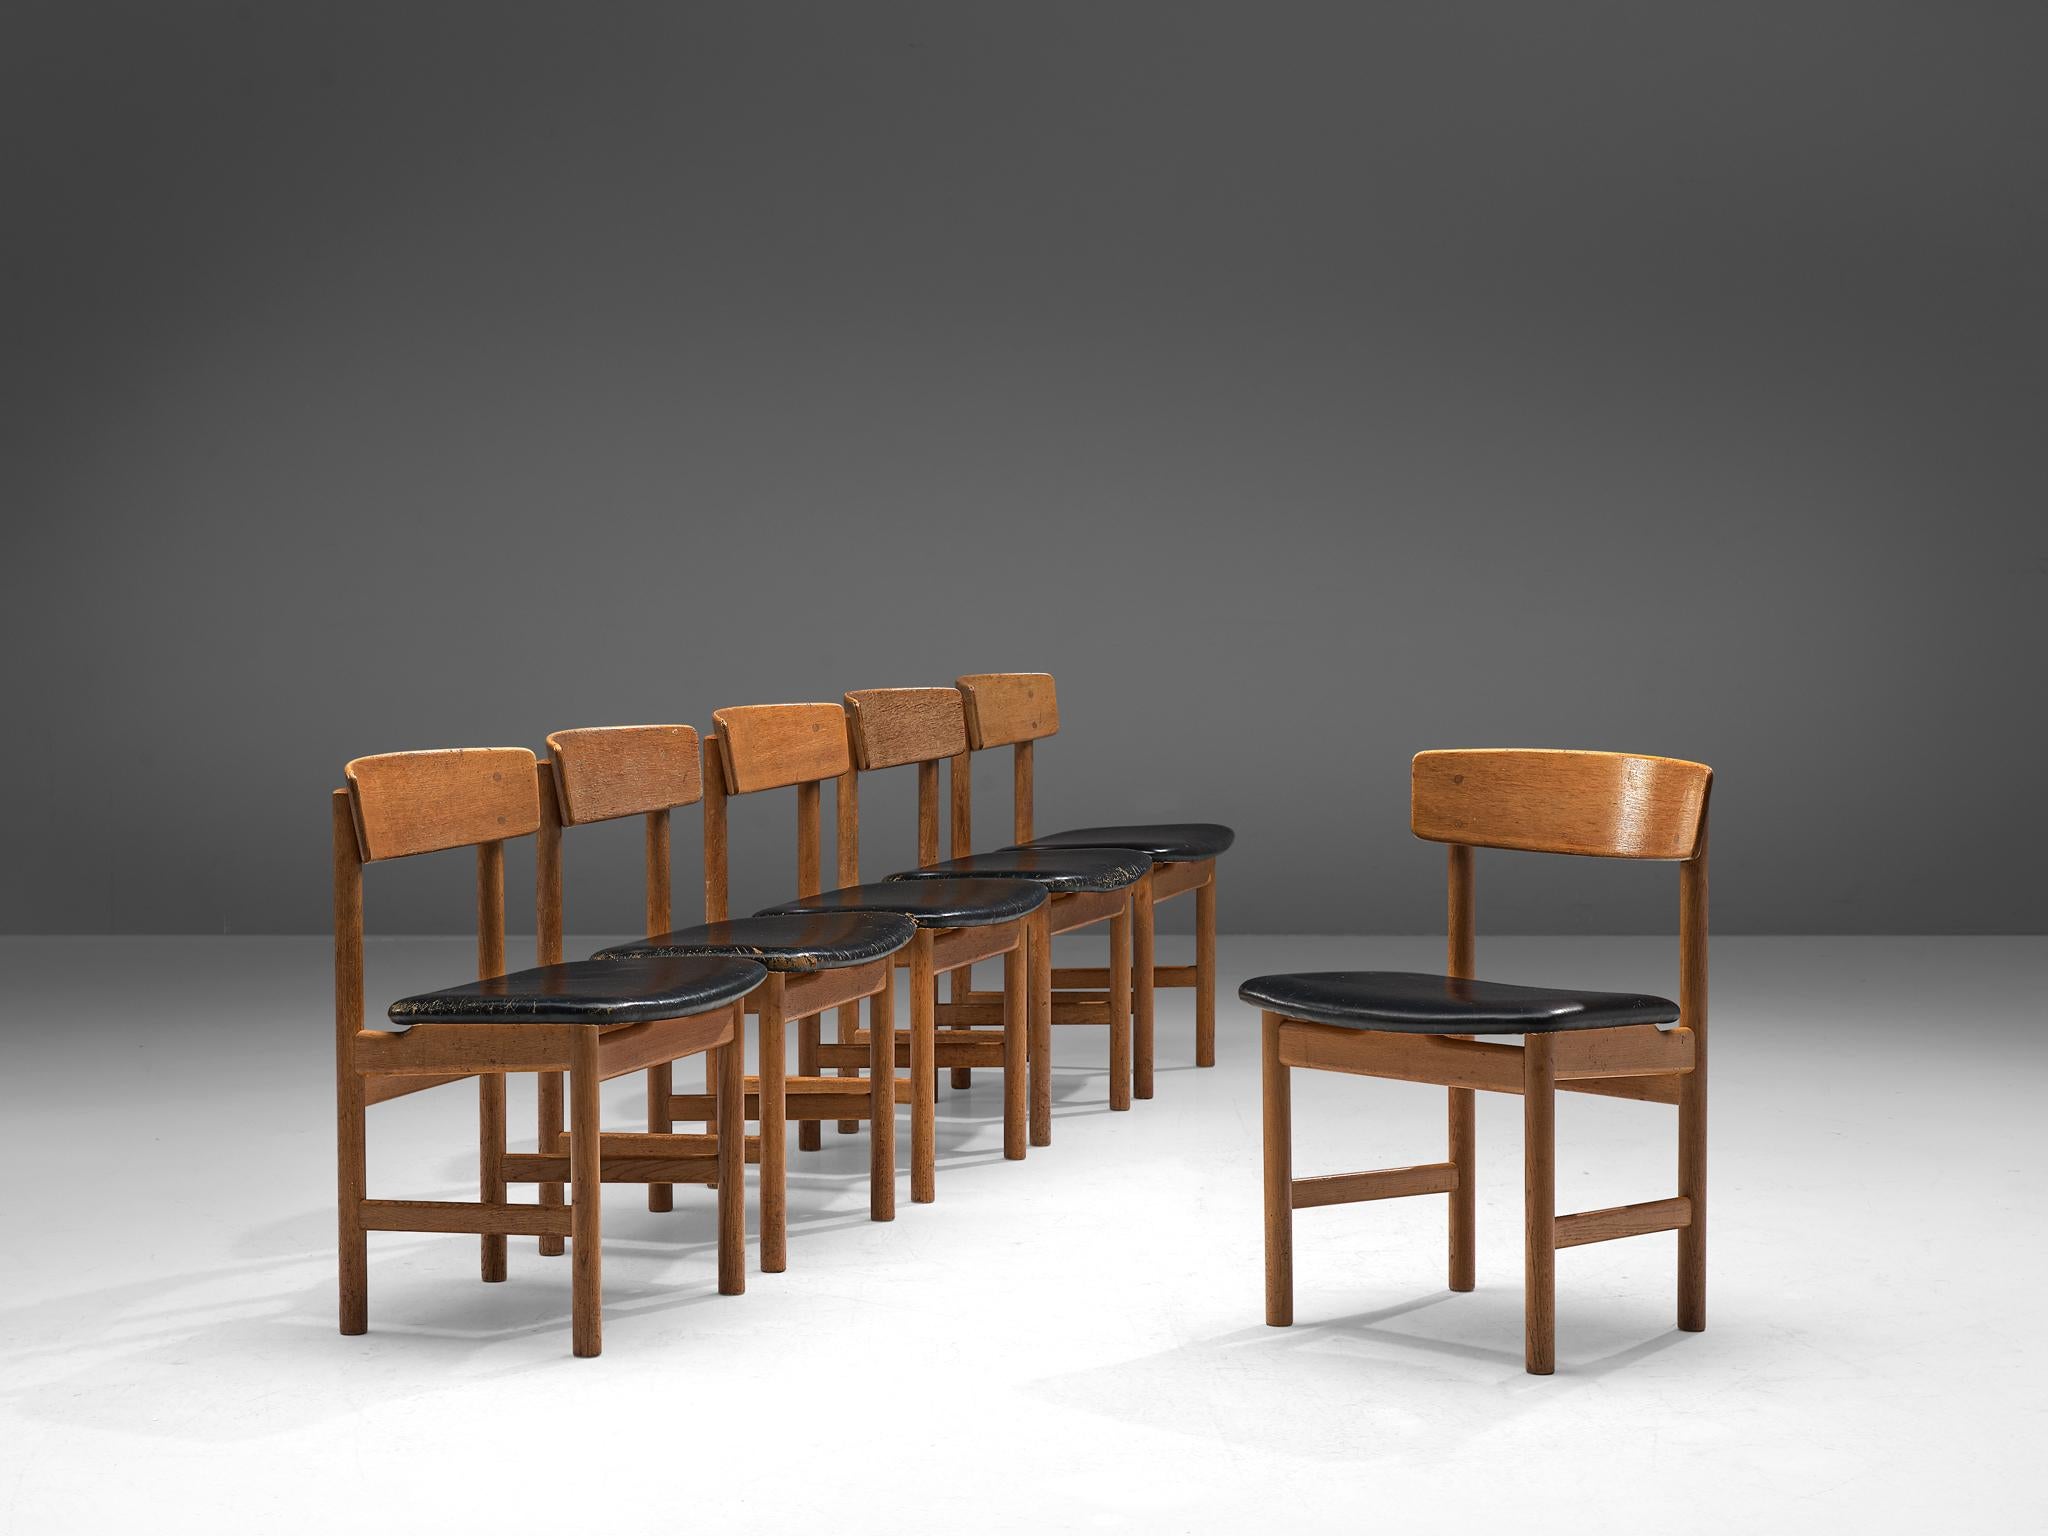 Børge Mogensen for Fredericia Stolefabrik, set of 6 chairs model 3236, oak and leather, Denmark, 1960s.

Set of six dining chairs in oak and black leather upholstery. These chairs show beautiful lines in their modest appearance. The back features a